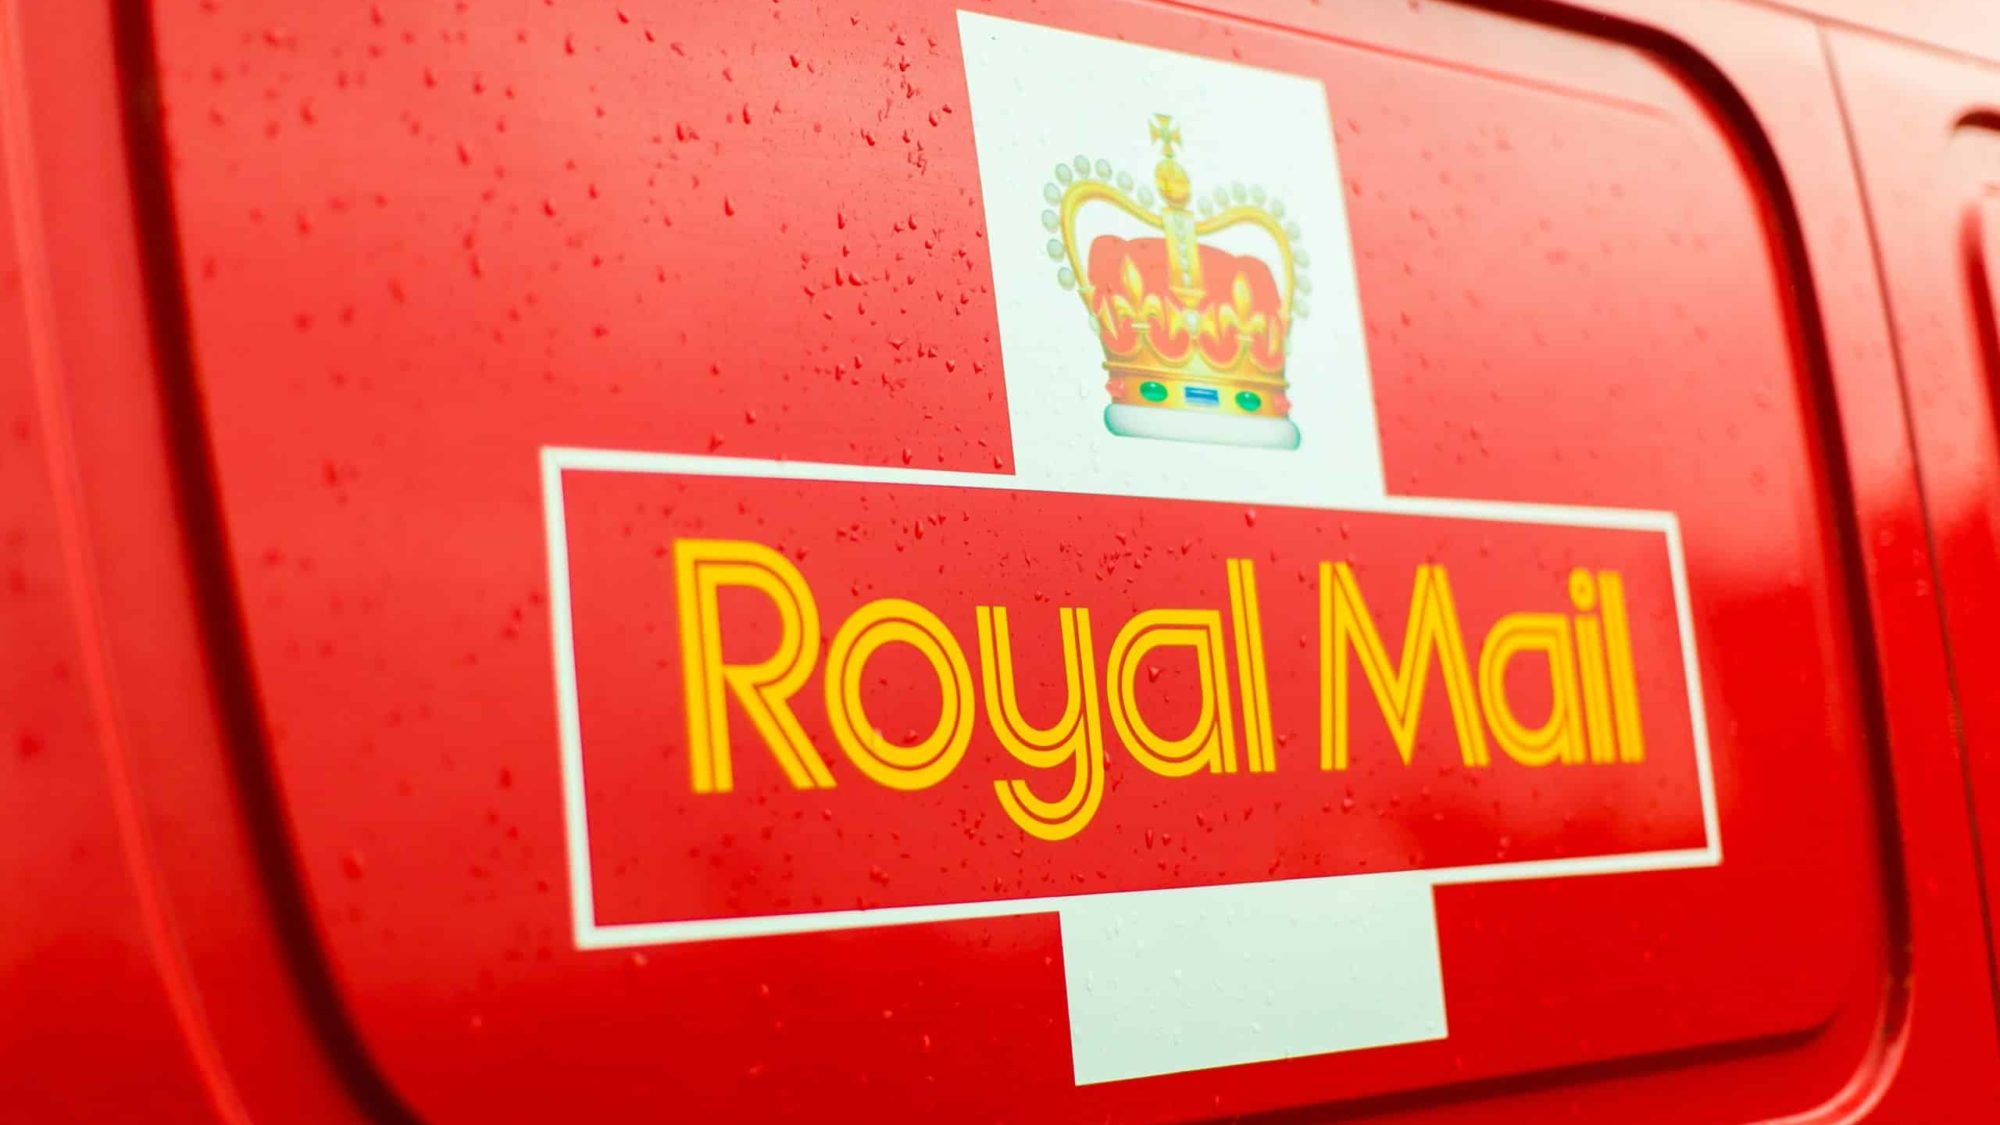 Royal Mail lead times lag behind competitors as strike action and cyber-attacks begin to bite